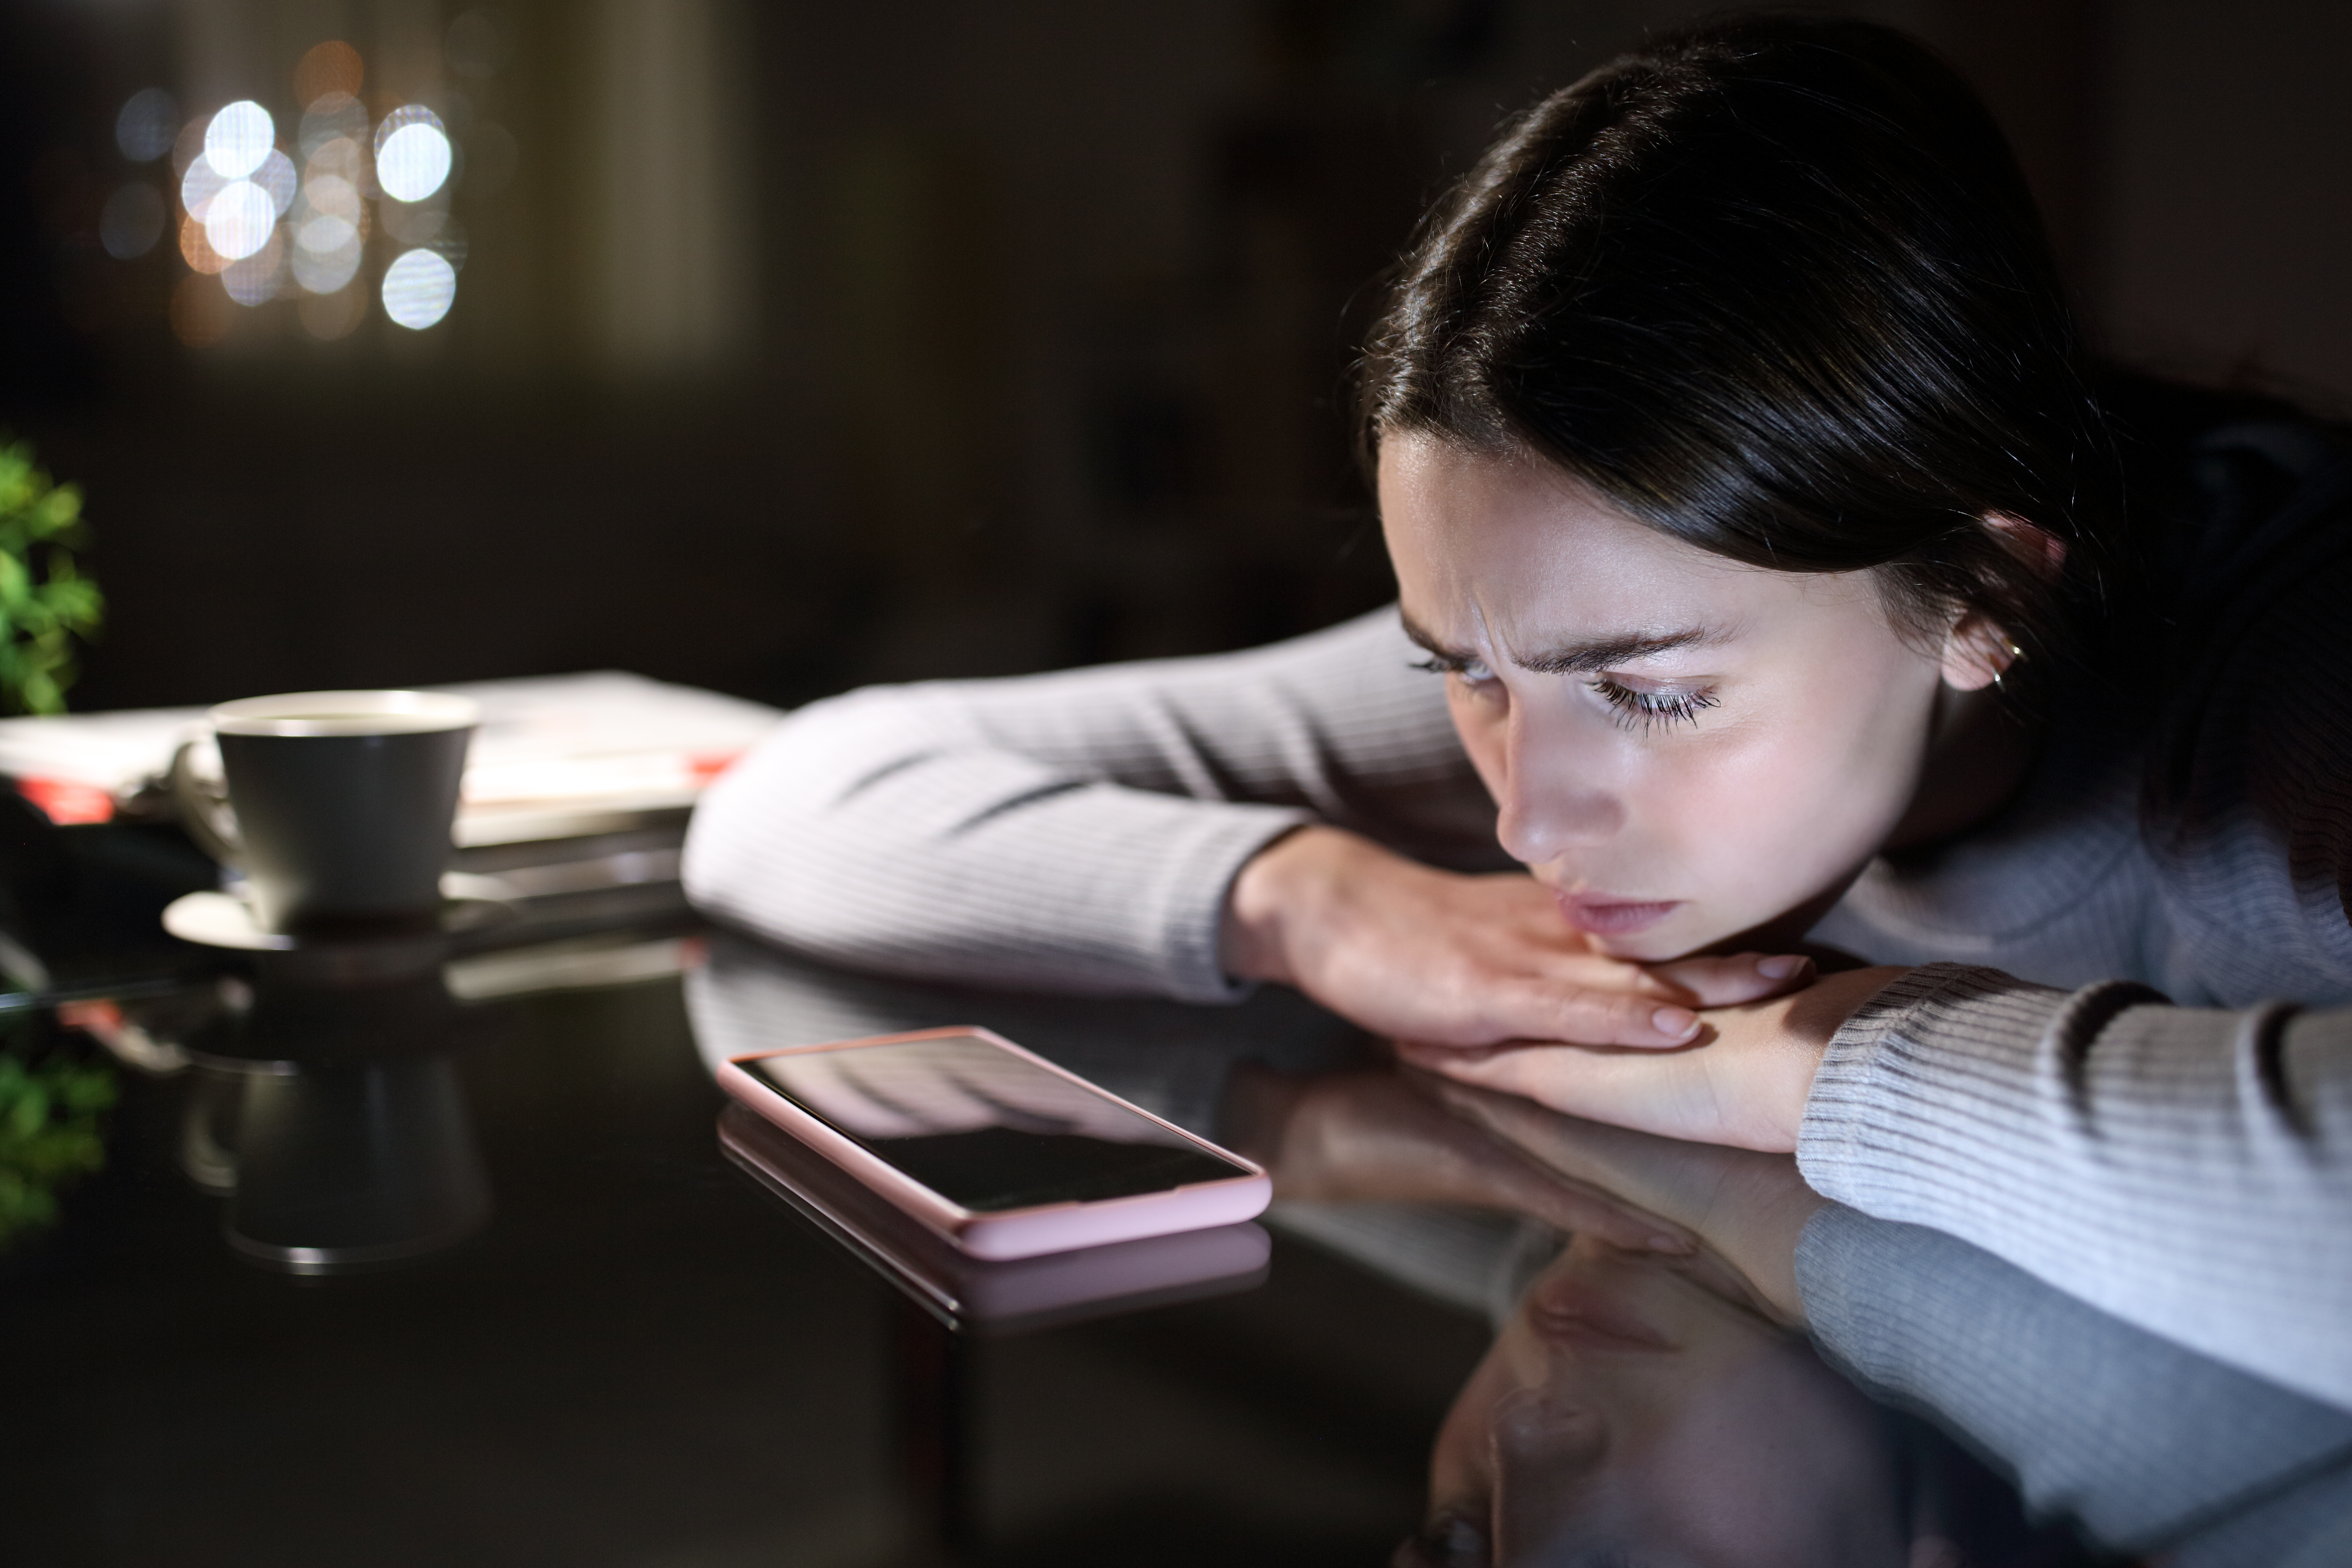 Sad woman with a mobile phone in the night at home. | Source: Shutterstock